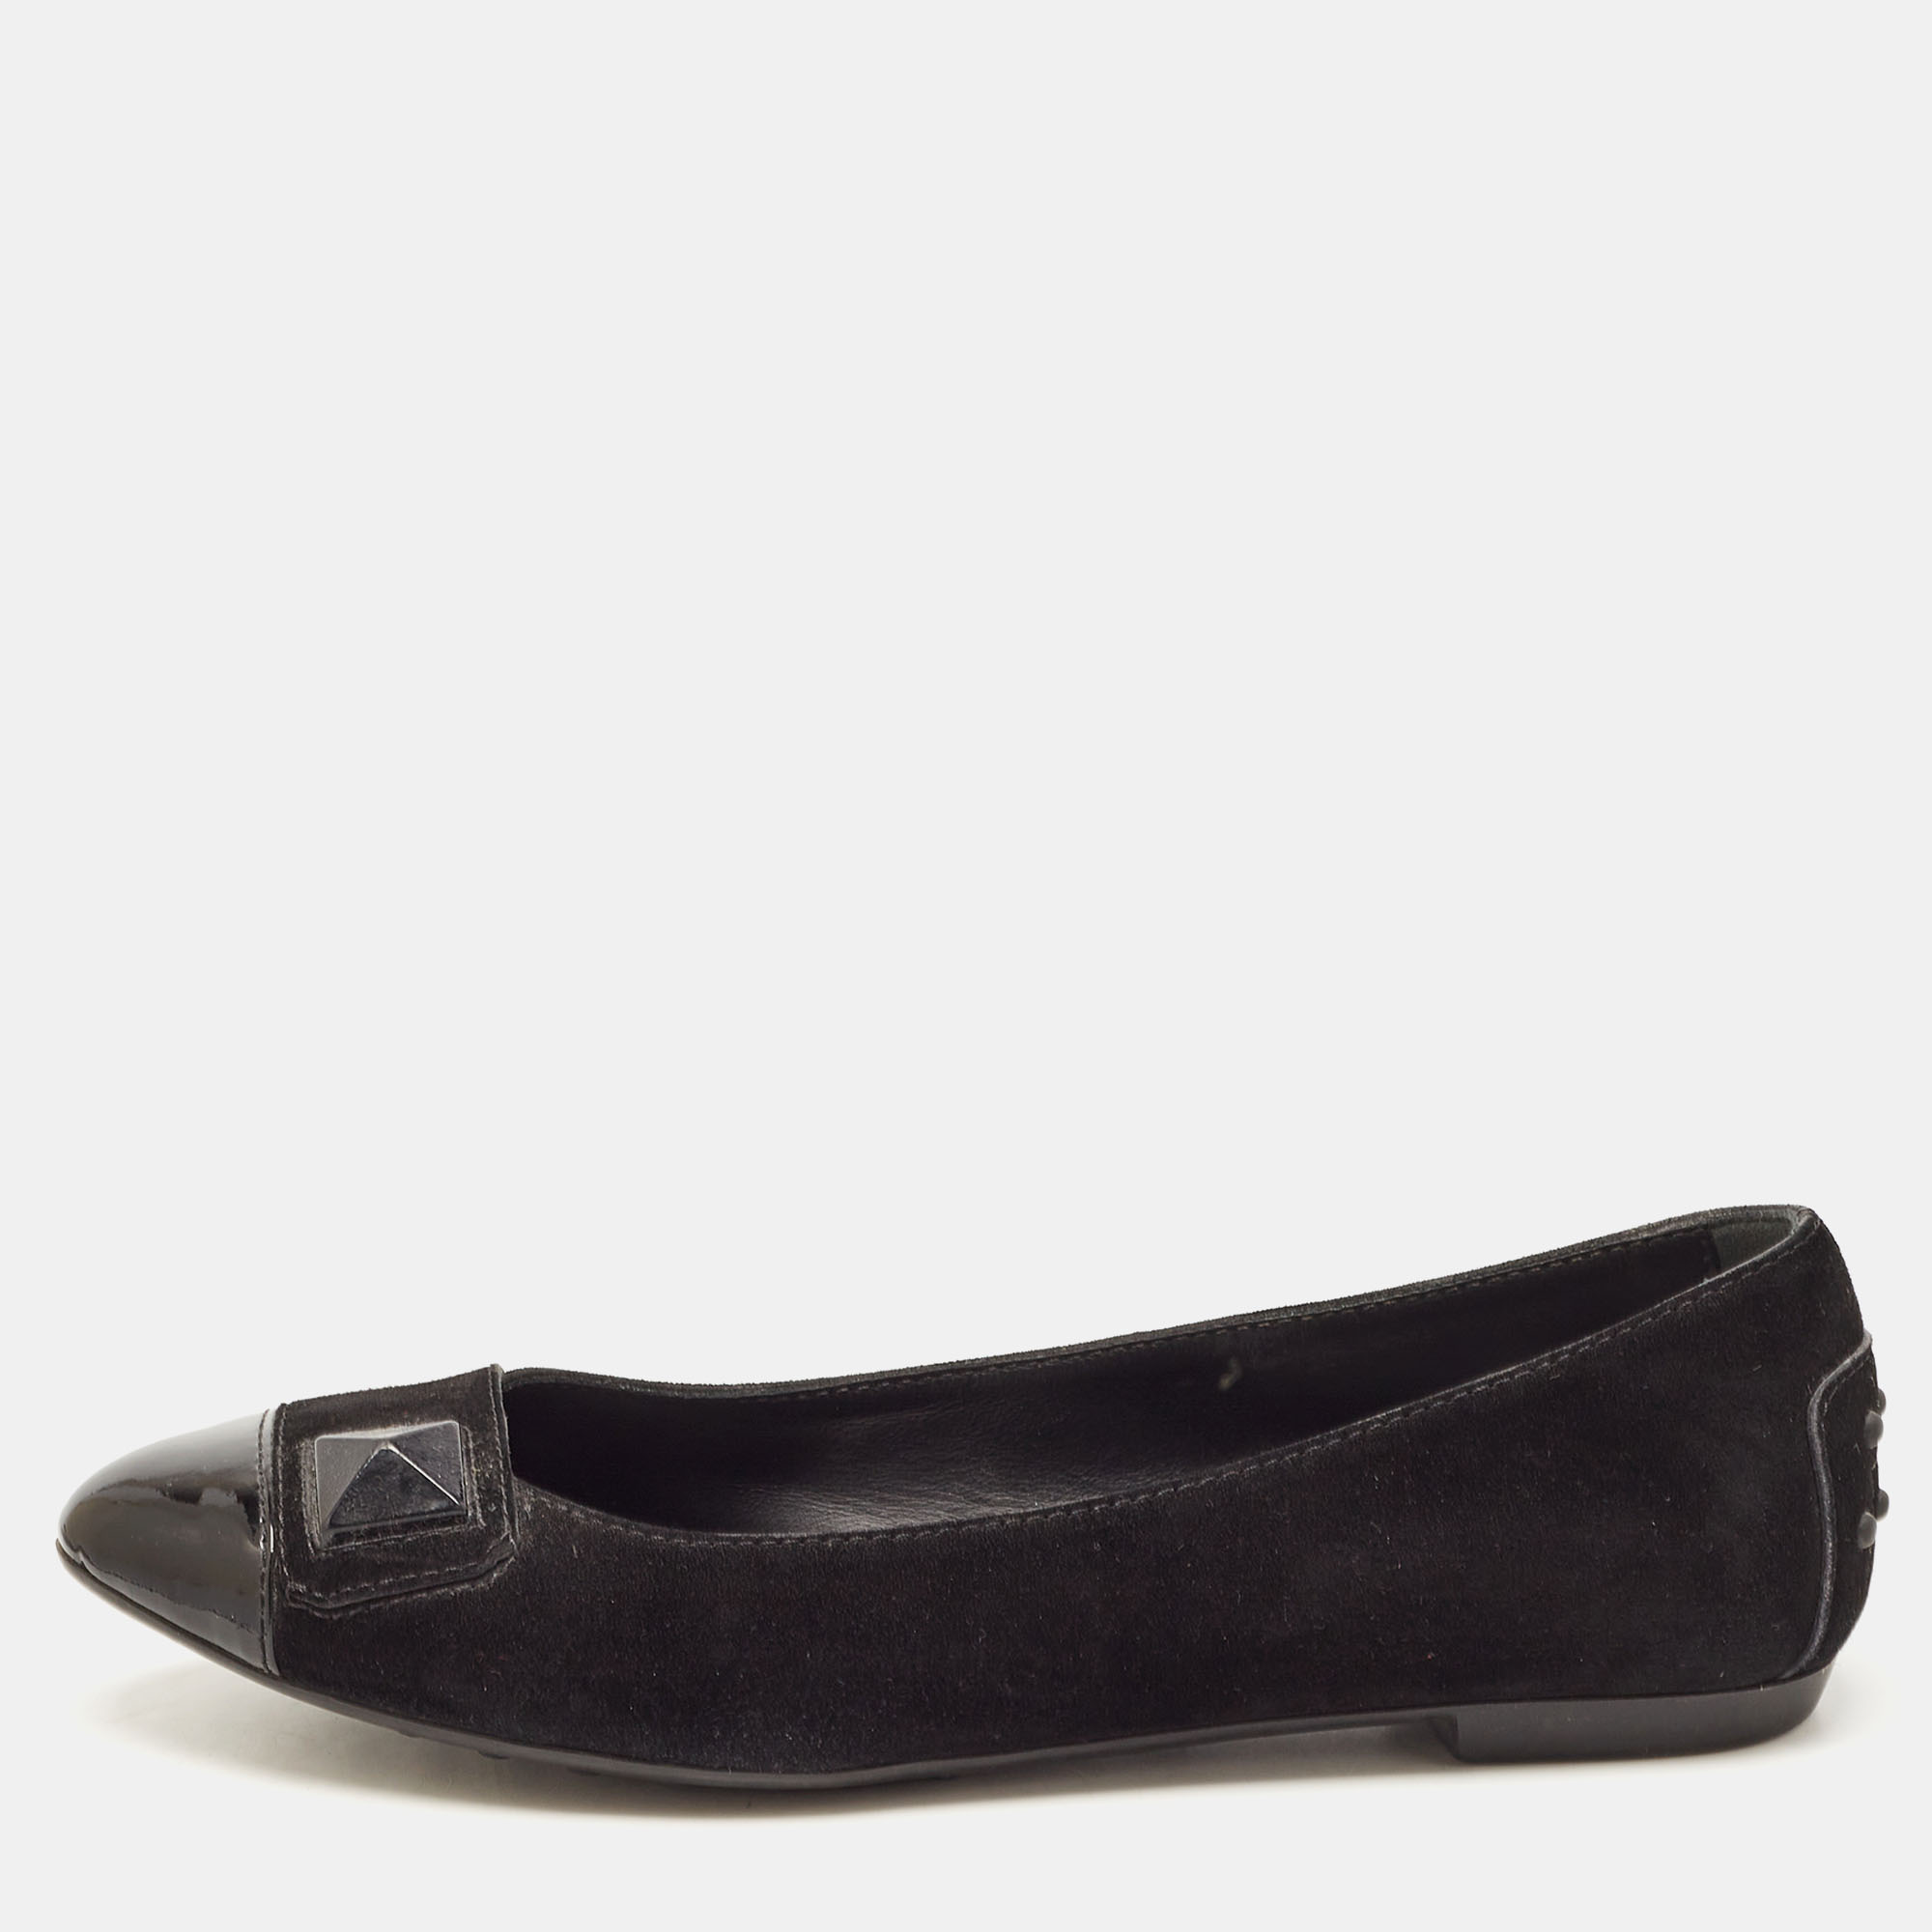 Tod's black suede and patent leather ballet flats size 36